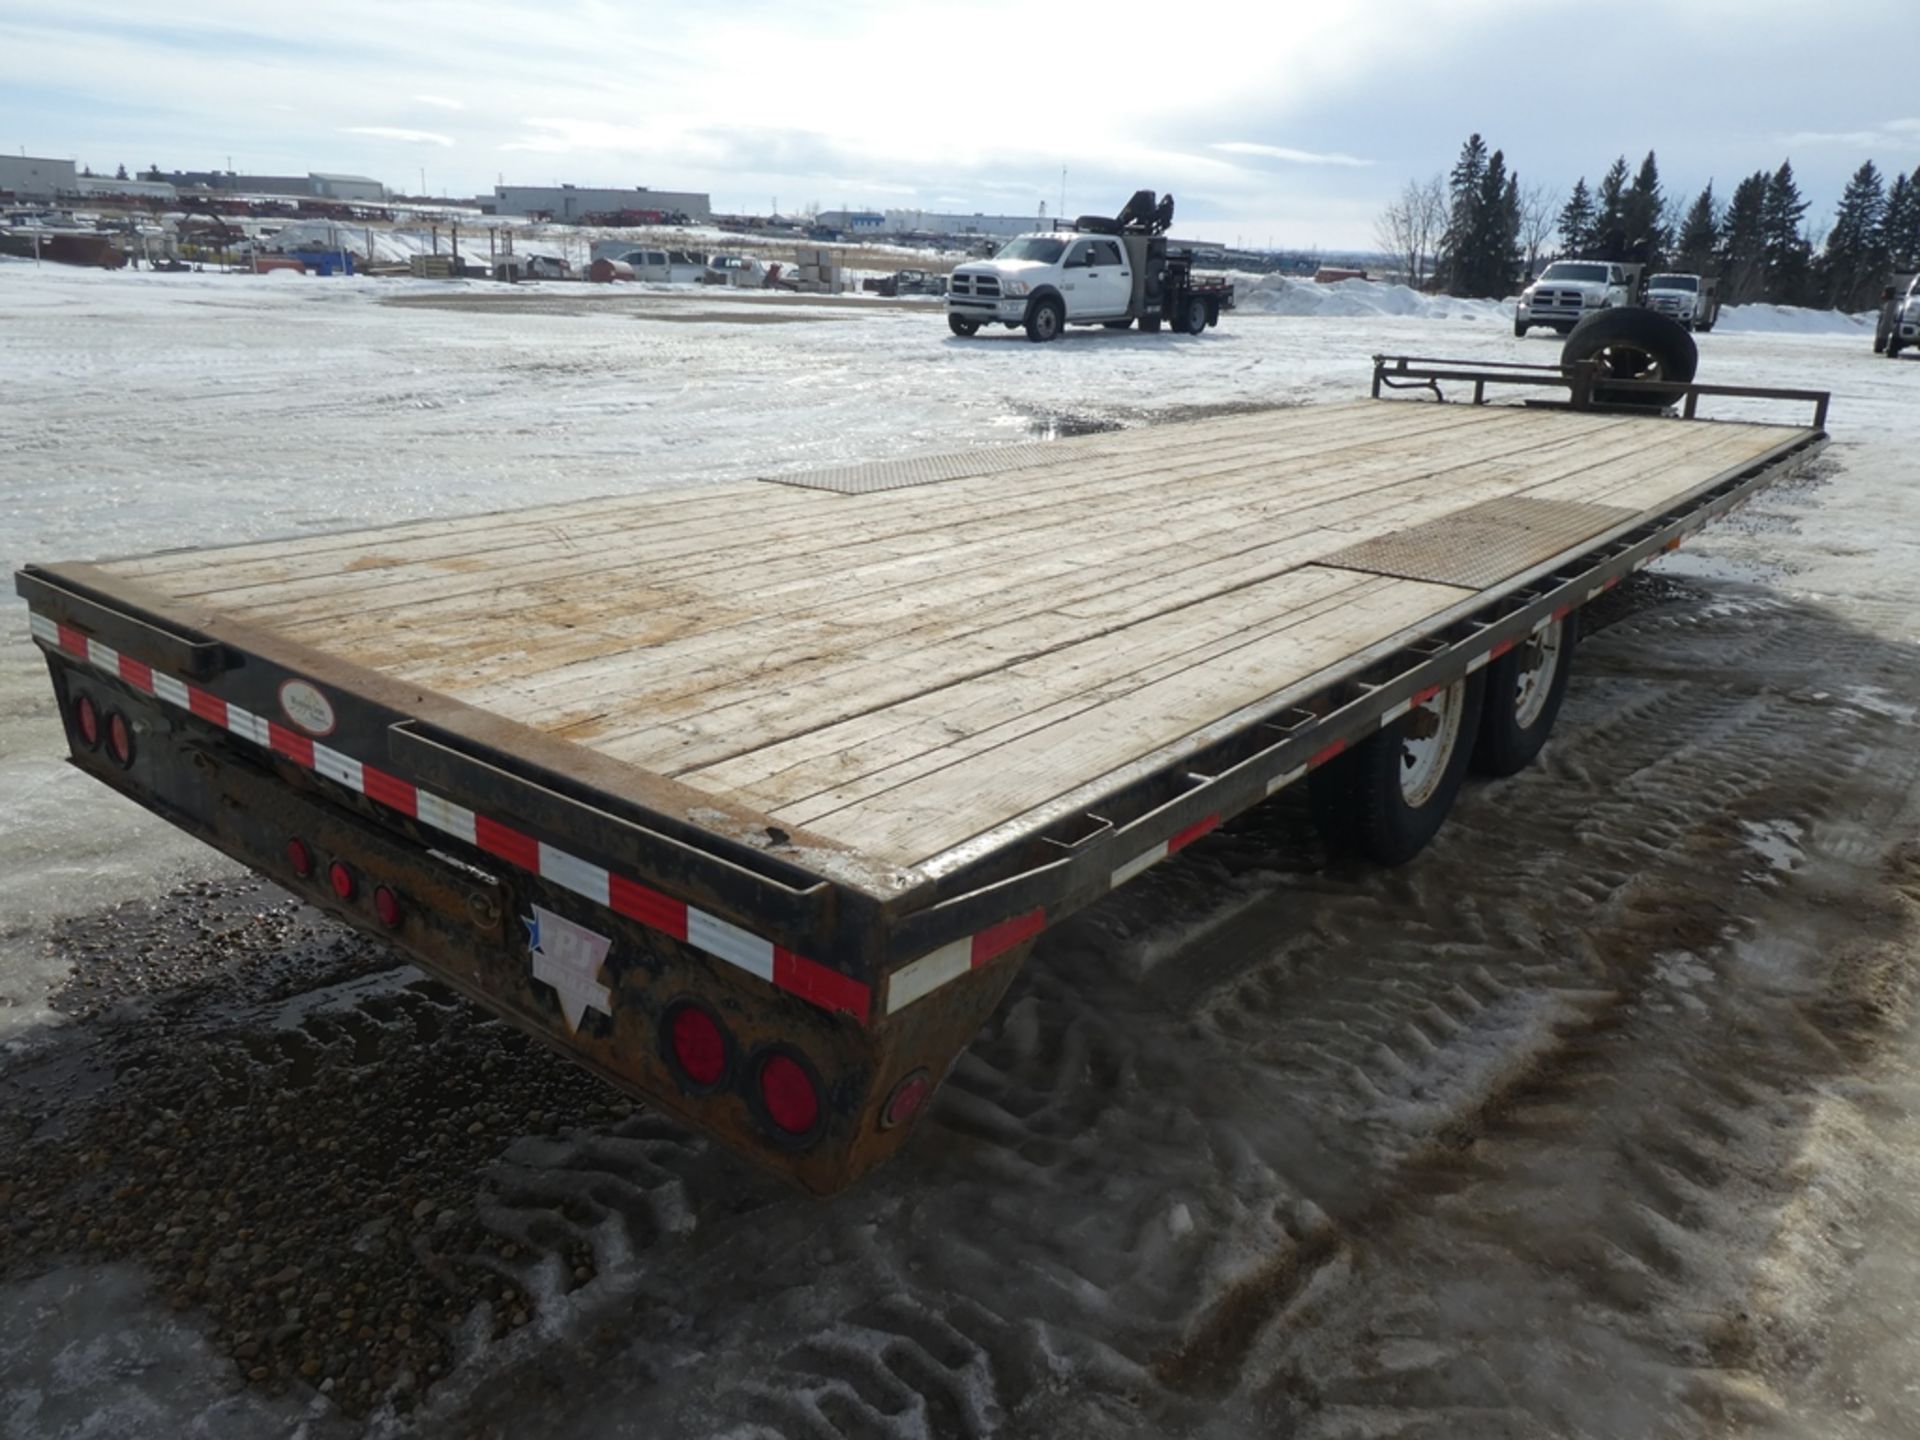 2013 PJ T/A 14000LB DECK-OVER EQUIPMENT TRAILERS W/RAMPS, BALL HITCH, 8'6" X 24FT - Image 3 of 5